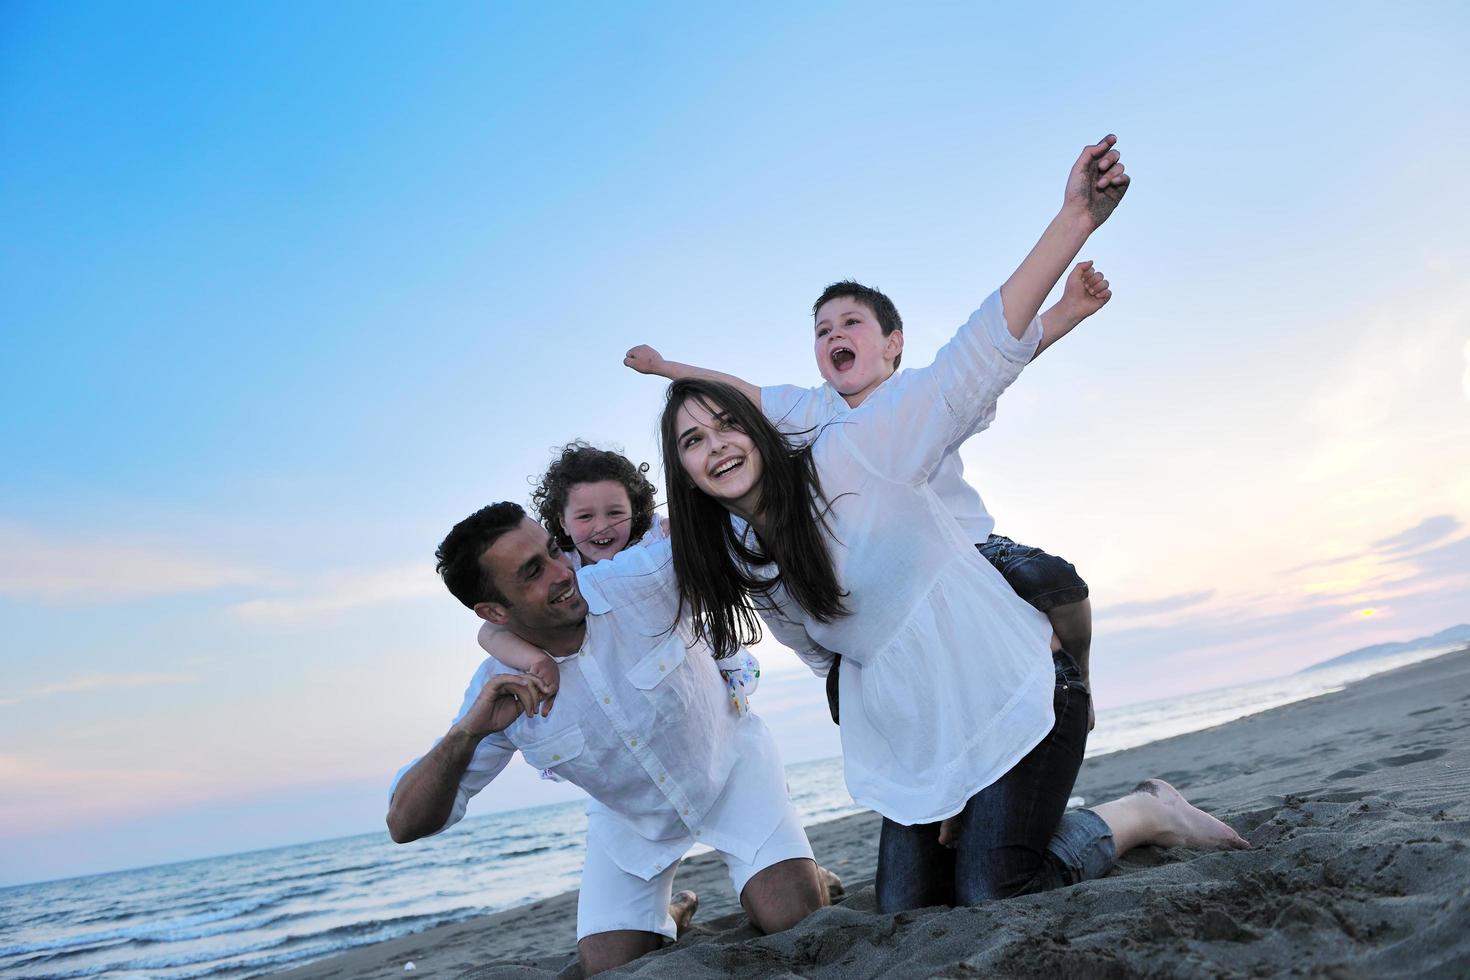 happy young family have fun on beach photo